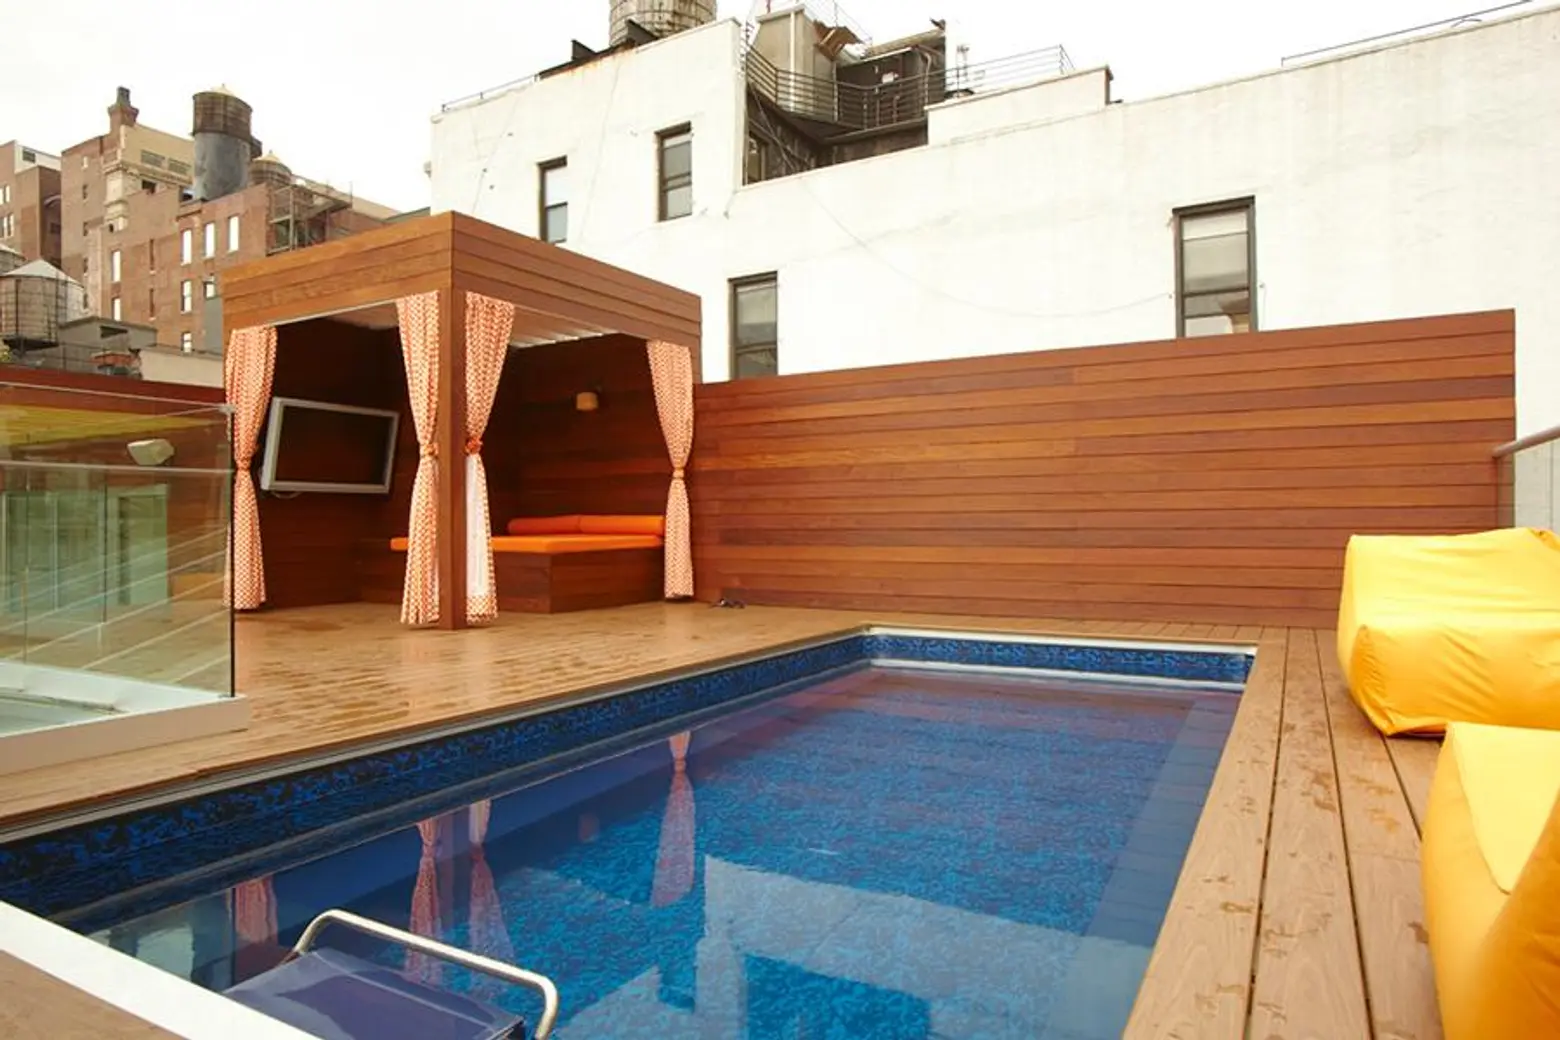 17 East 17th Street, apartment with rooftop pool, floating glass staircase, renovated historic landmark building